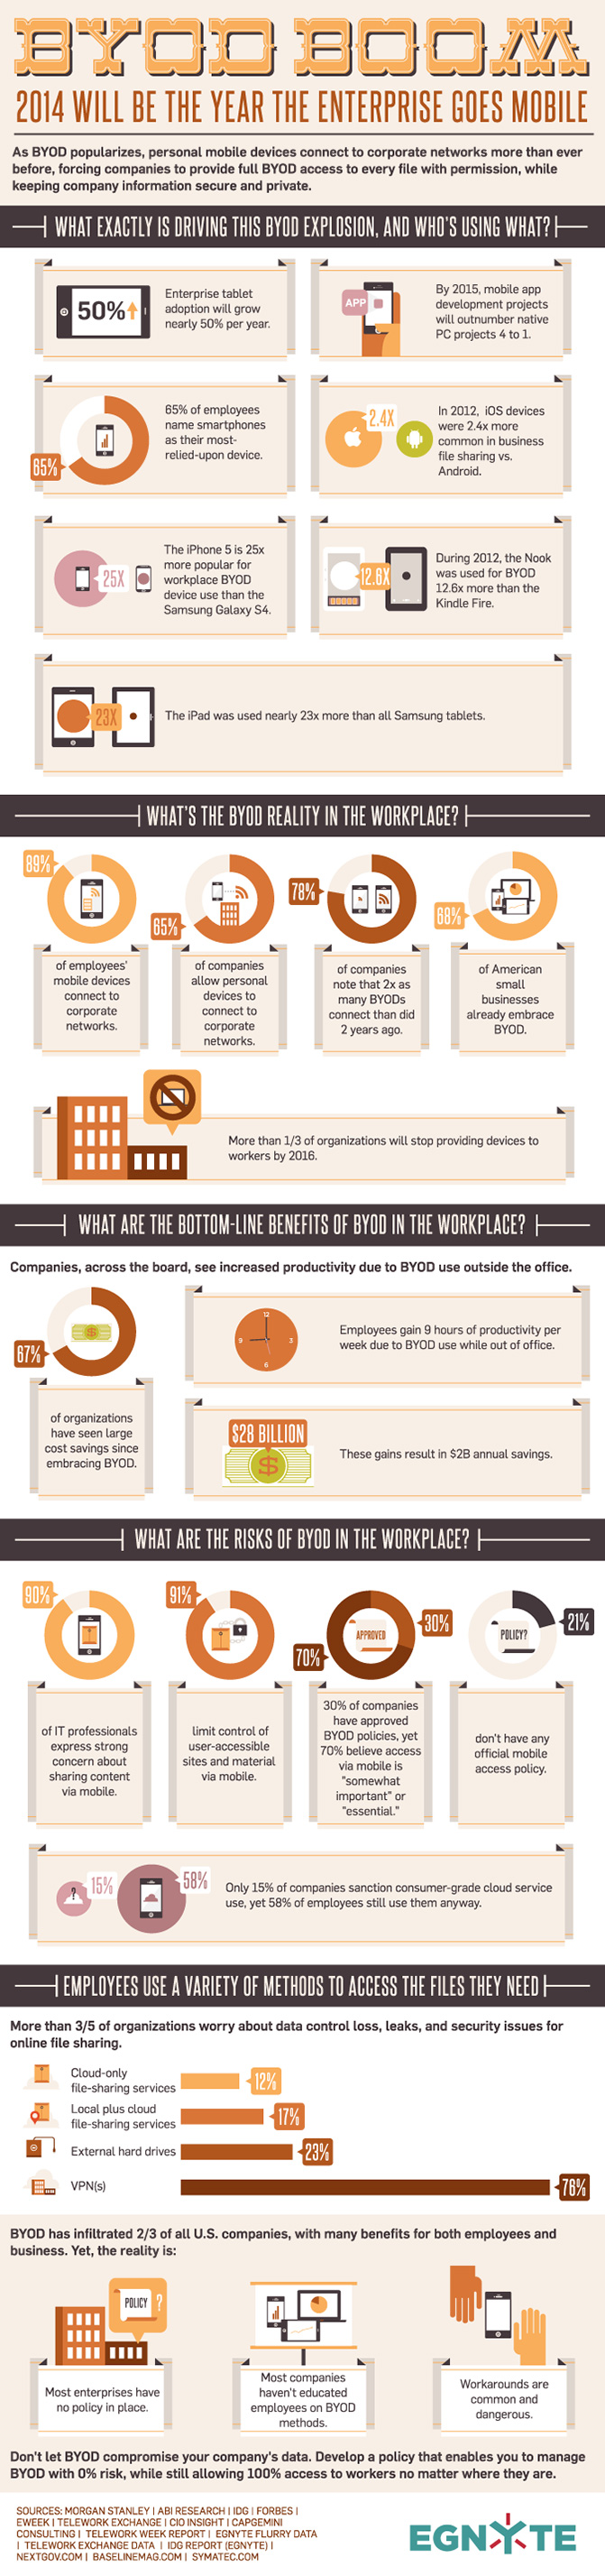 byod infographic Infographic: What does the BYOD trend actually mean for businesses?